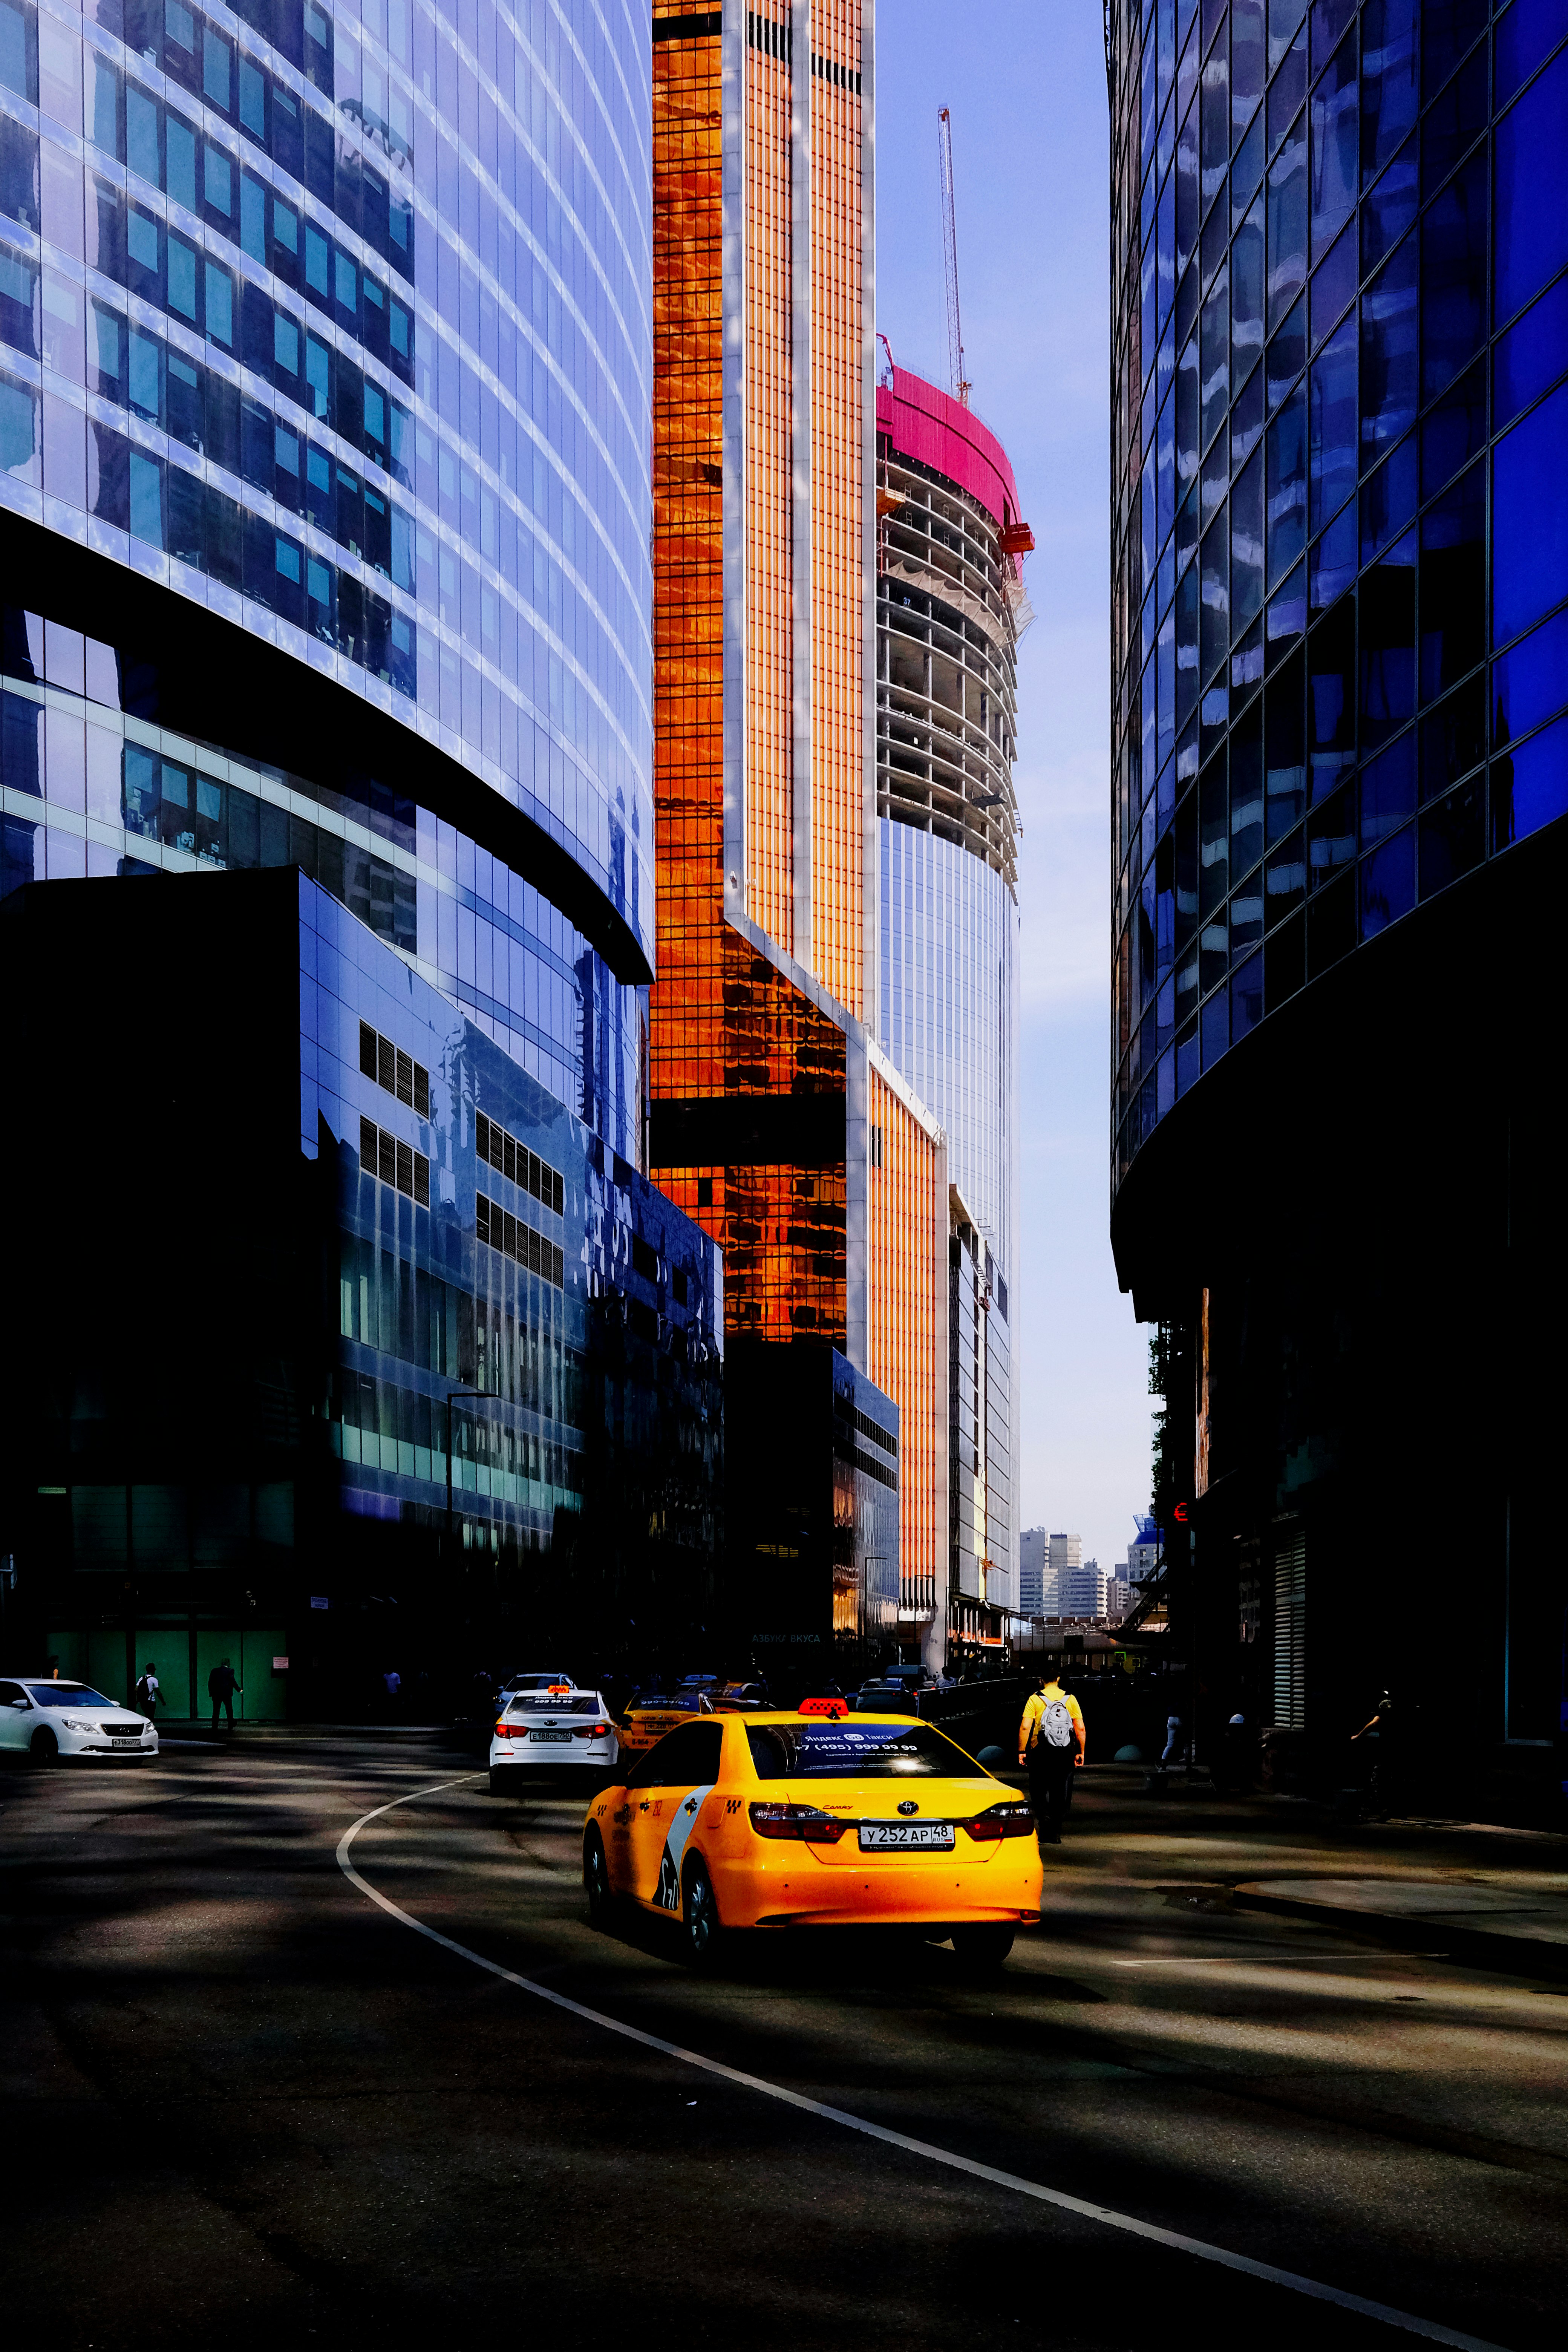 yellow taxi on road near high rise buildings during daytime